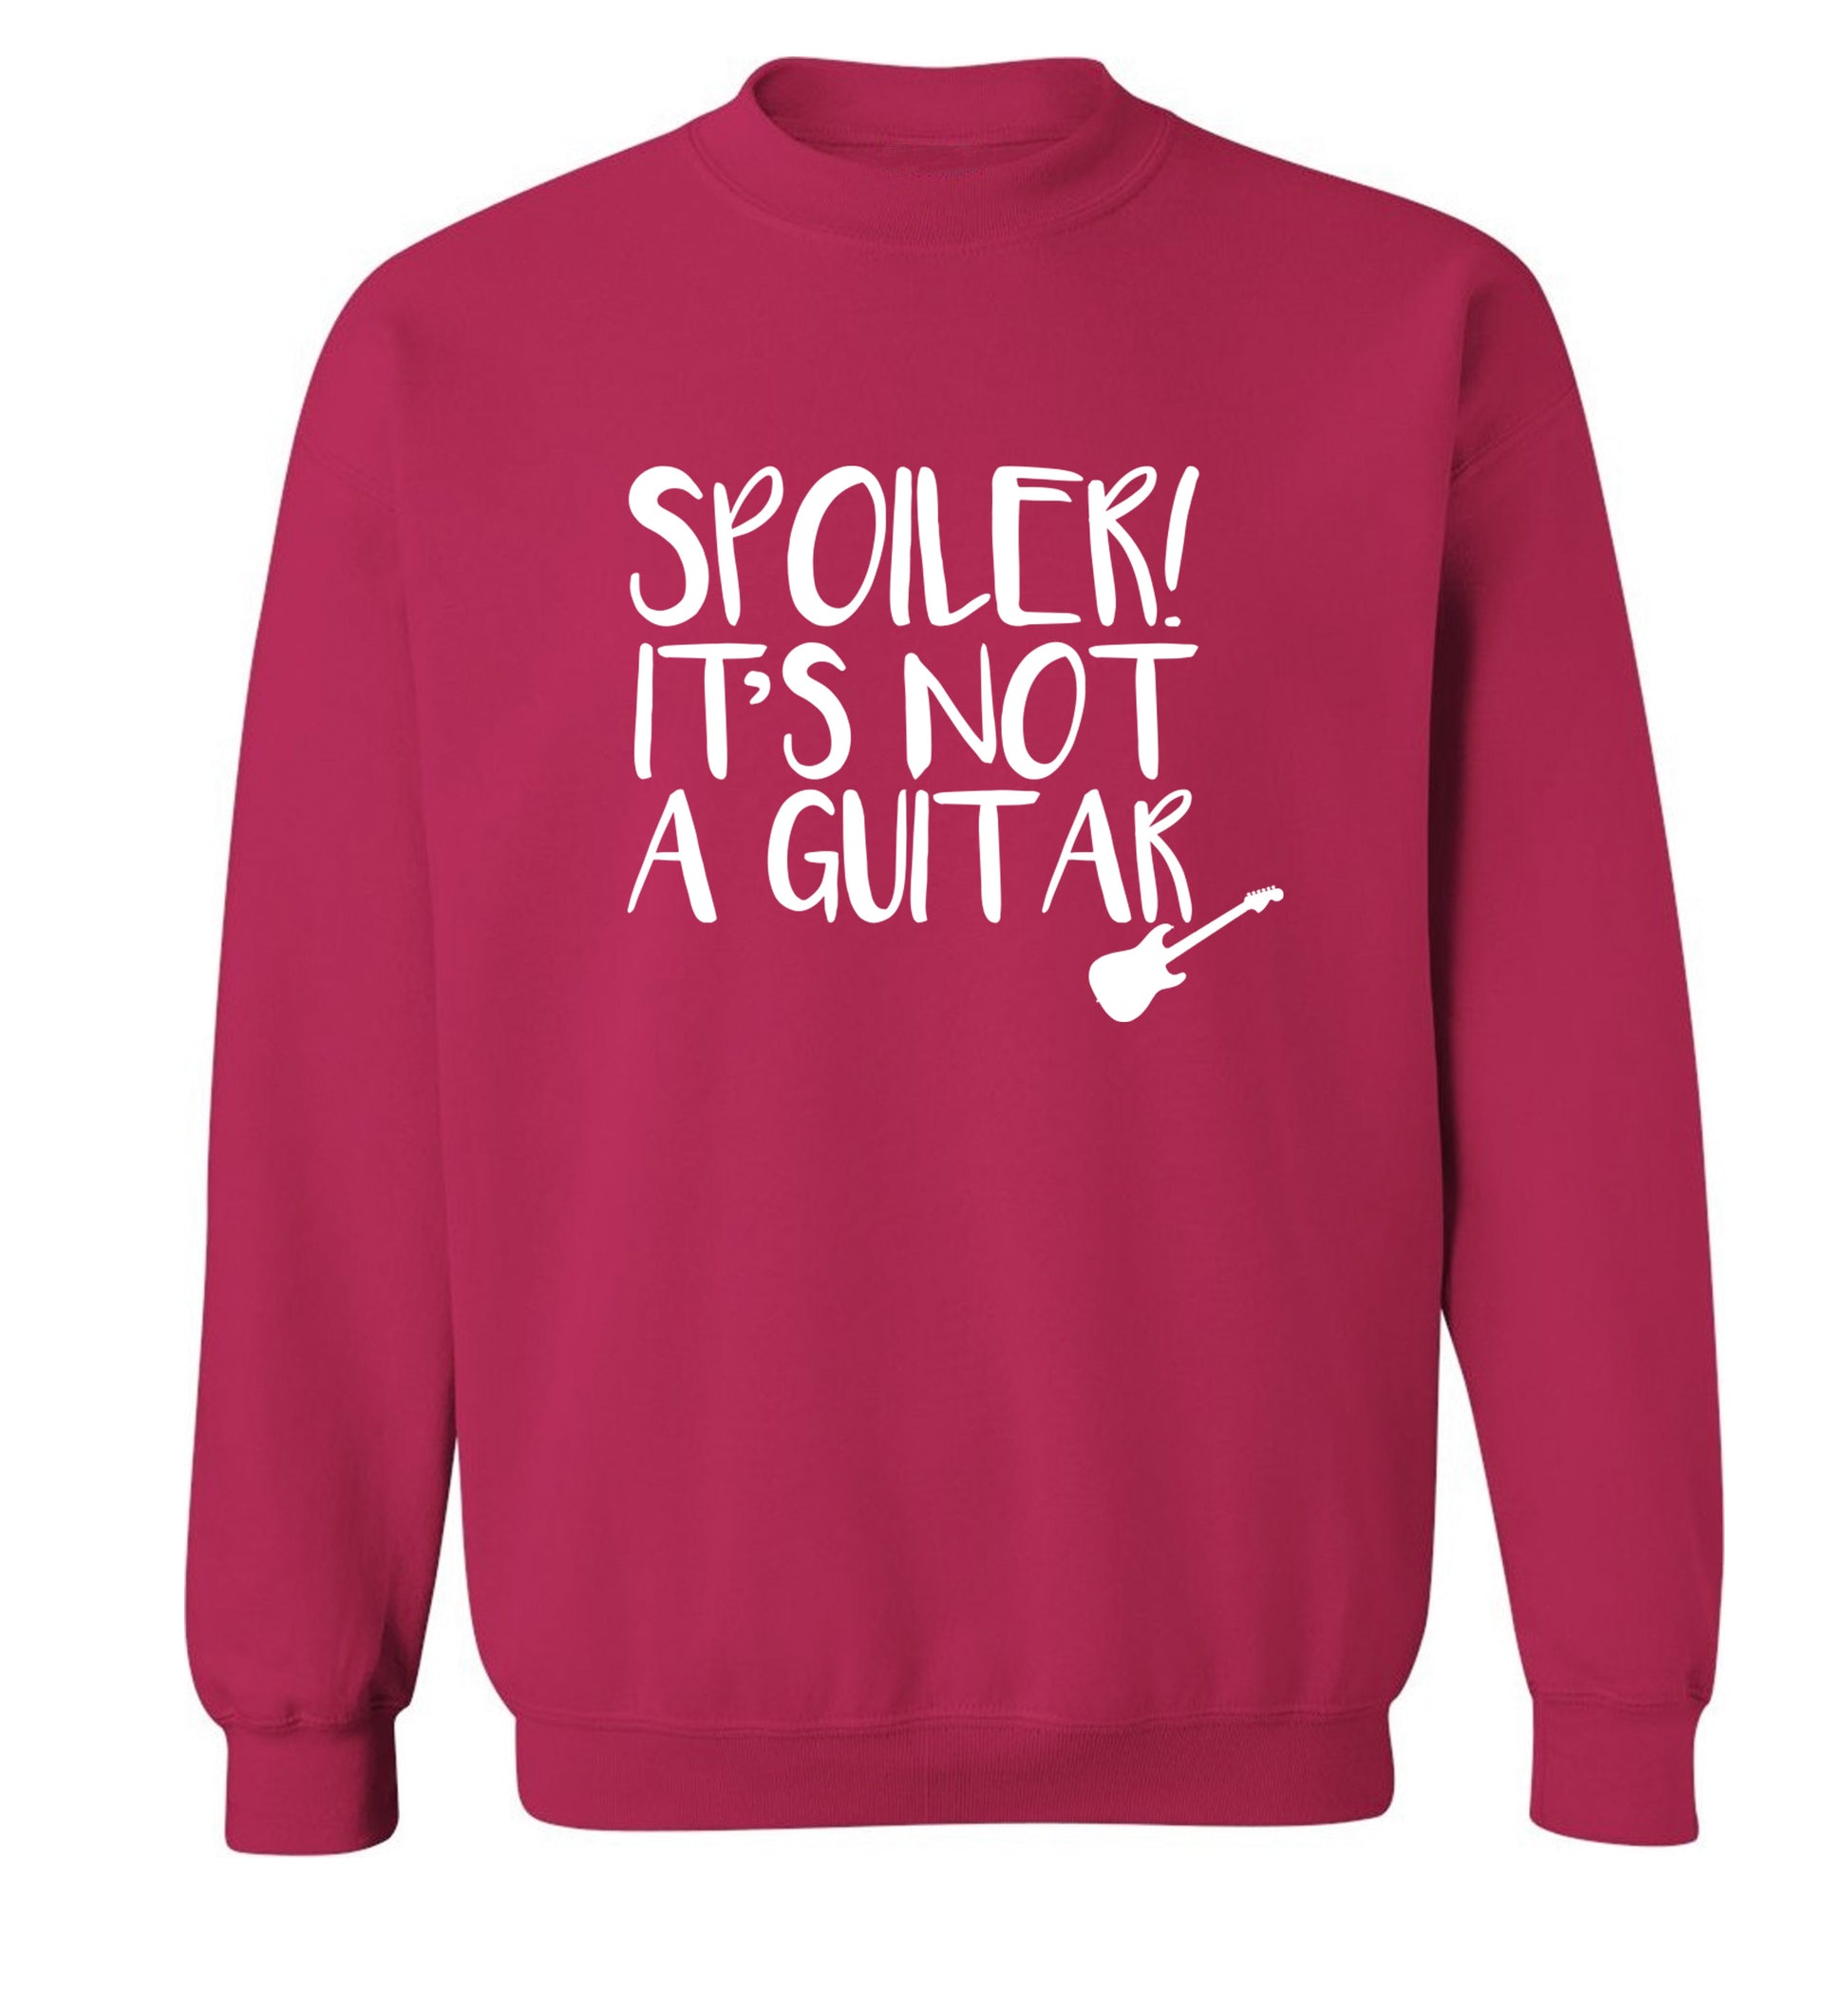 Spoiler it's not a guitar Adult's unisex pink Sweater 2XL